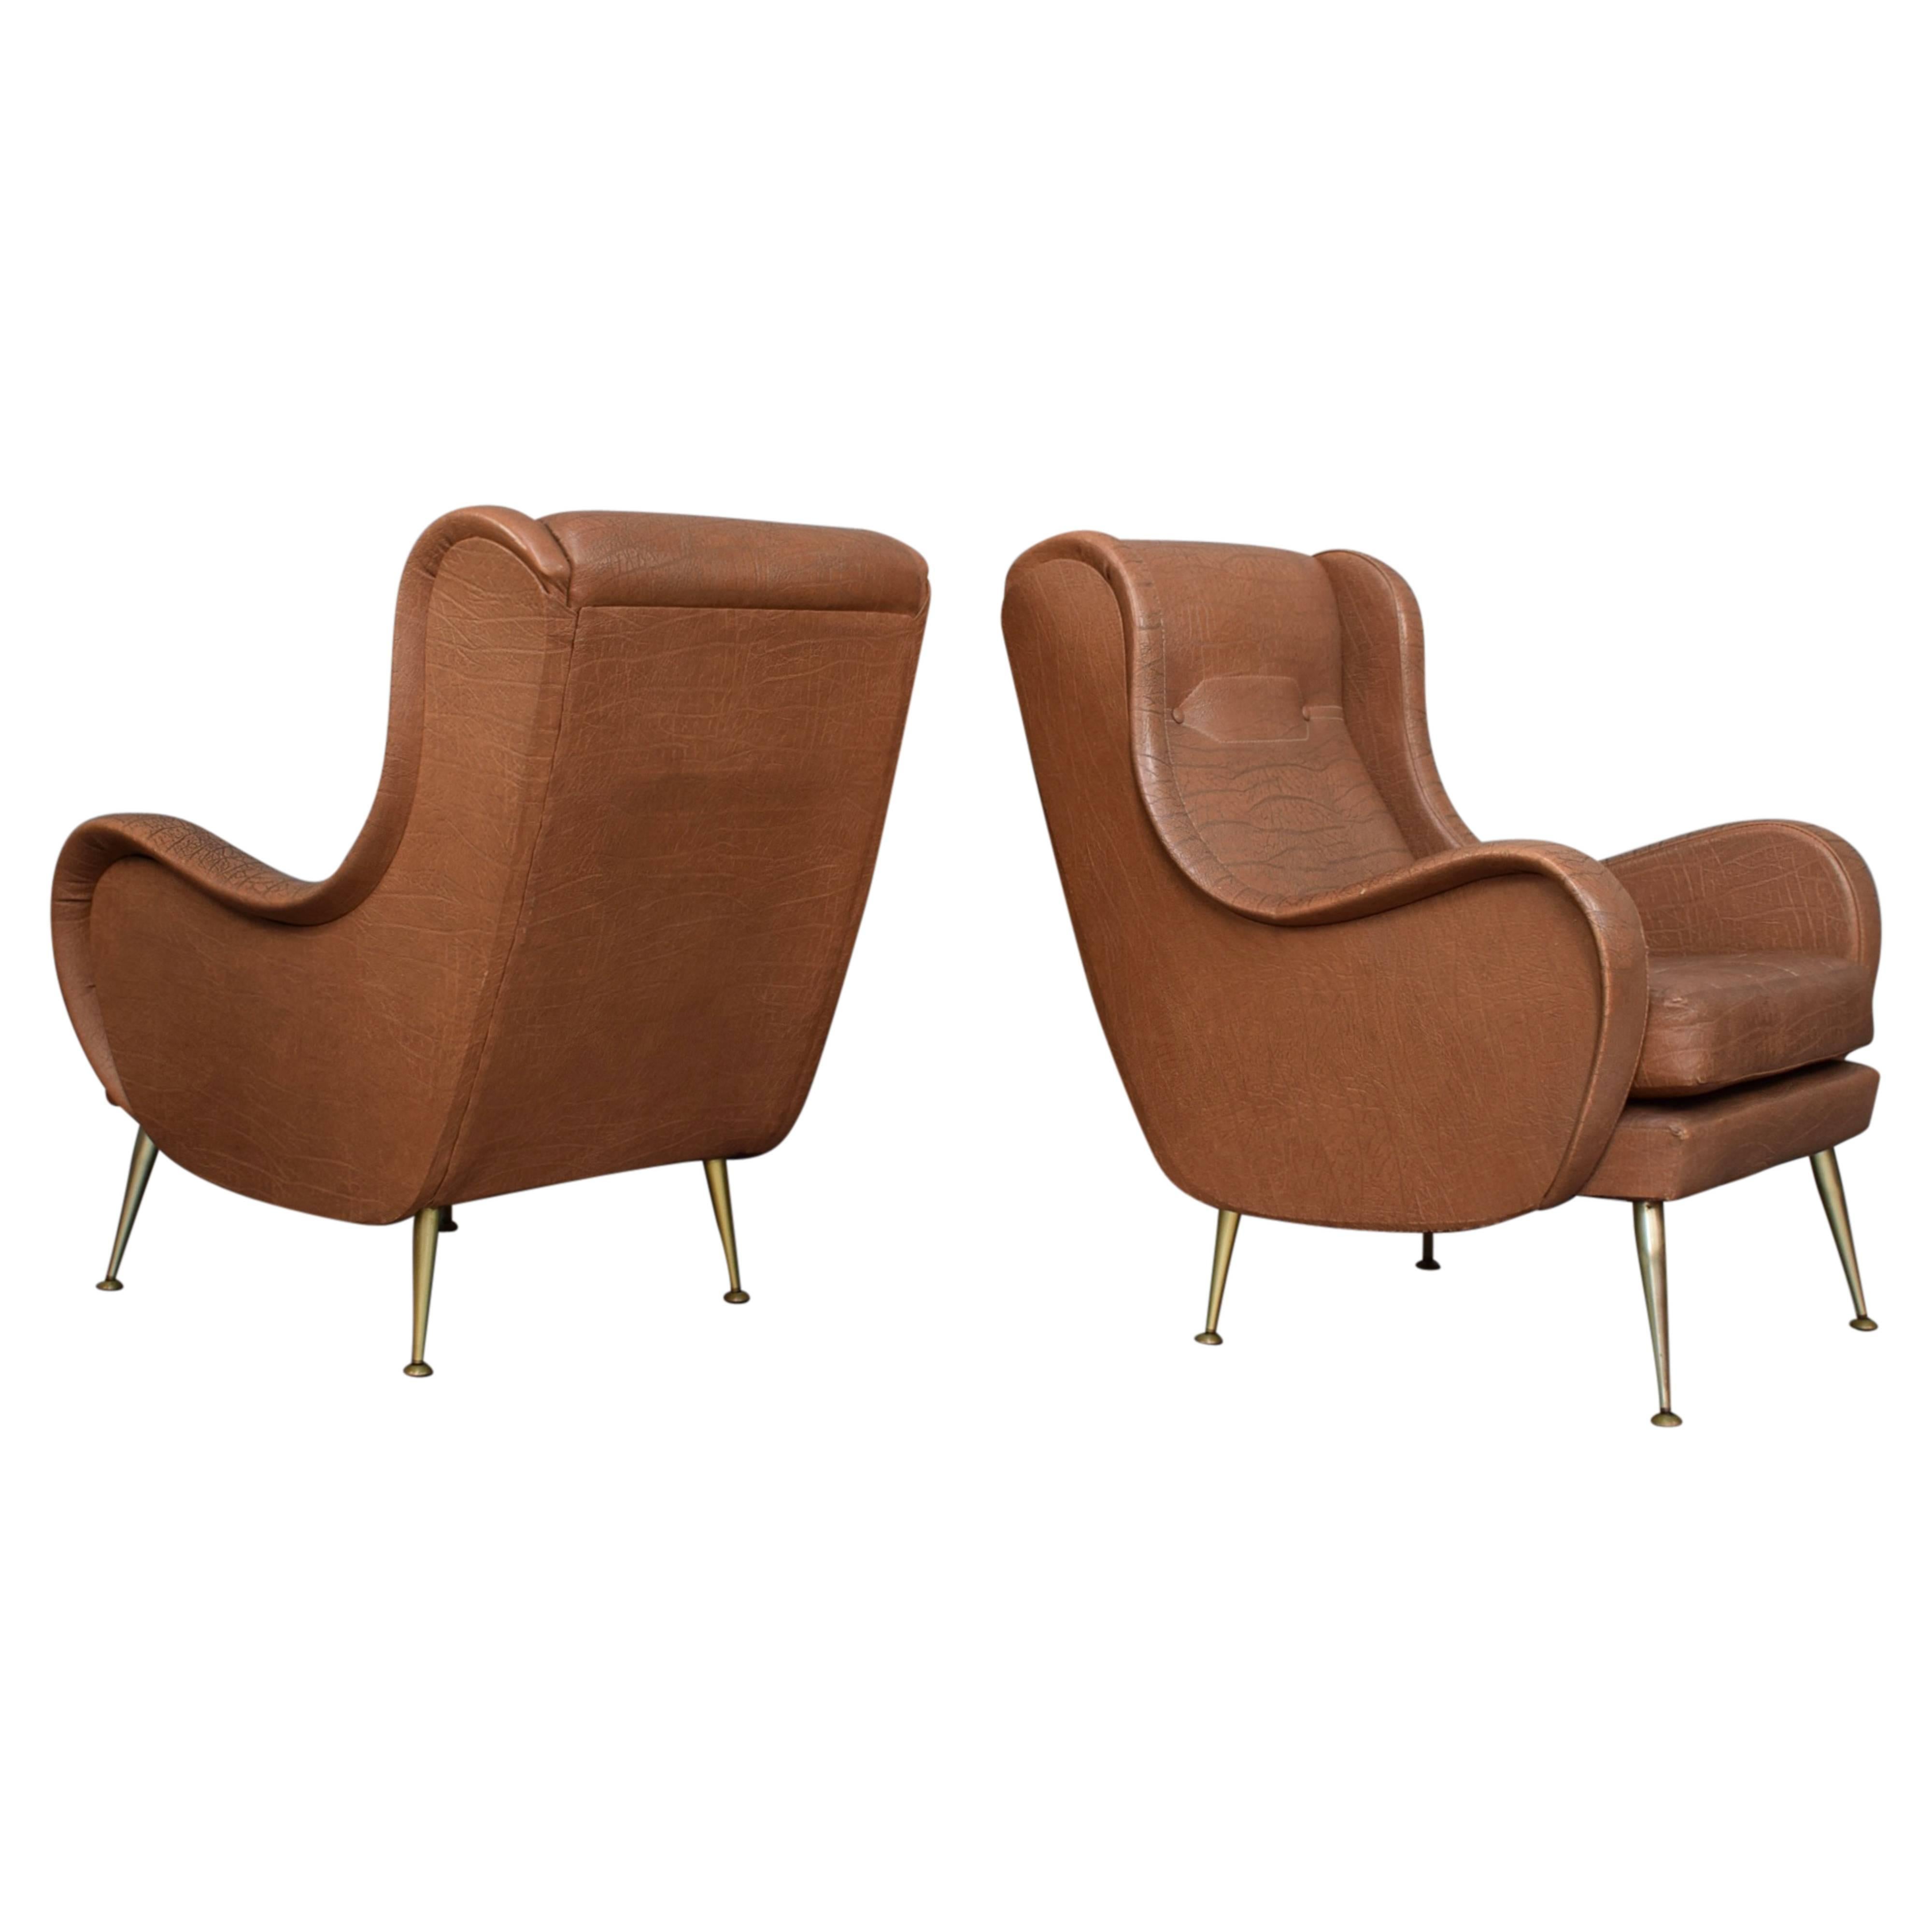 Gorgeous pair of Italian midcentury lounge chairs that will look best with a beautiful new fabric.

Design: Aldo Morbelli
Manufacturer: Unknown
Country: Italy
Model: Lounge wingback armchair
Material: Faux leather
Designed in 1950s
Date of